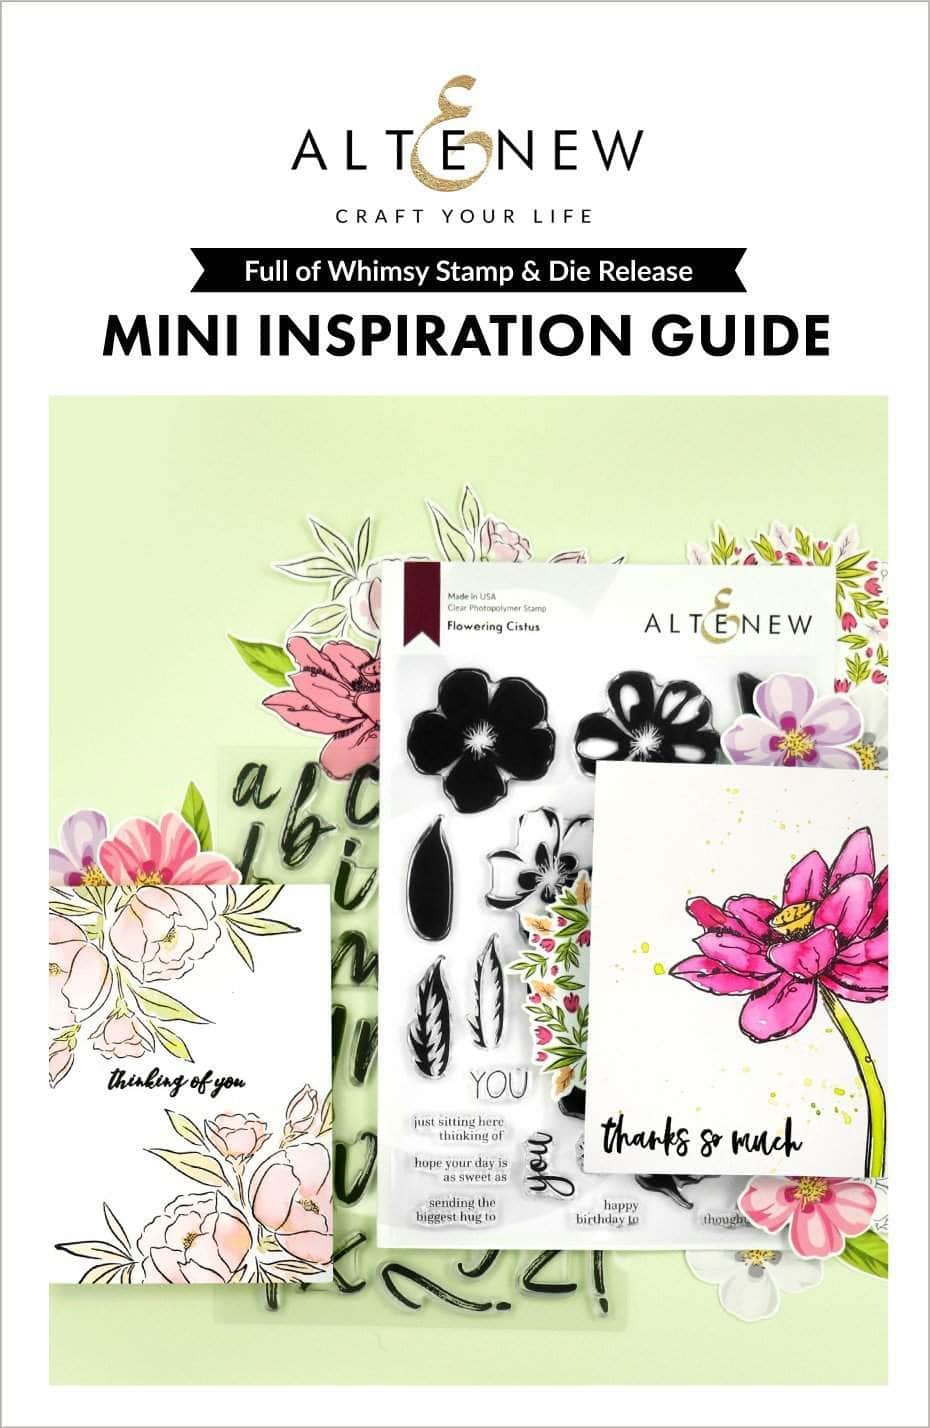 Printed Media Full of Whimsy Stamp & Die Release Mini Inspiration Guide